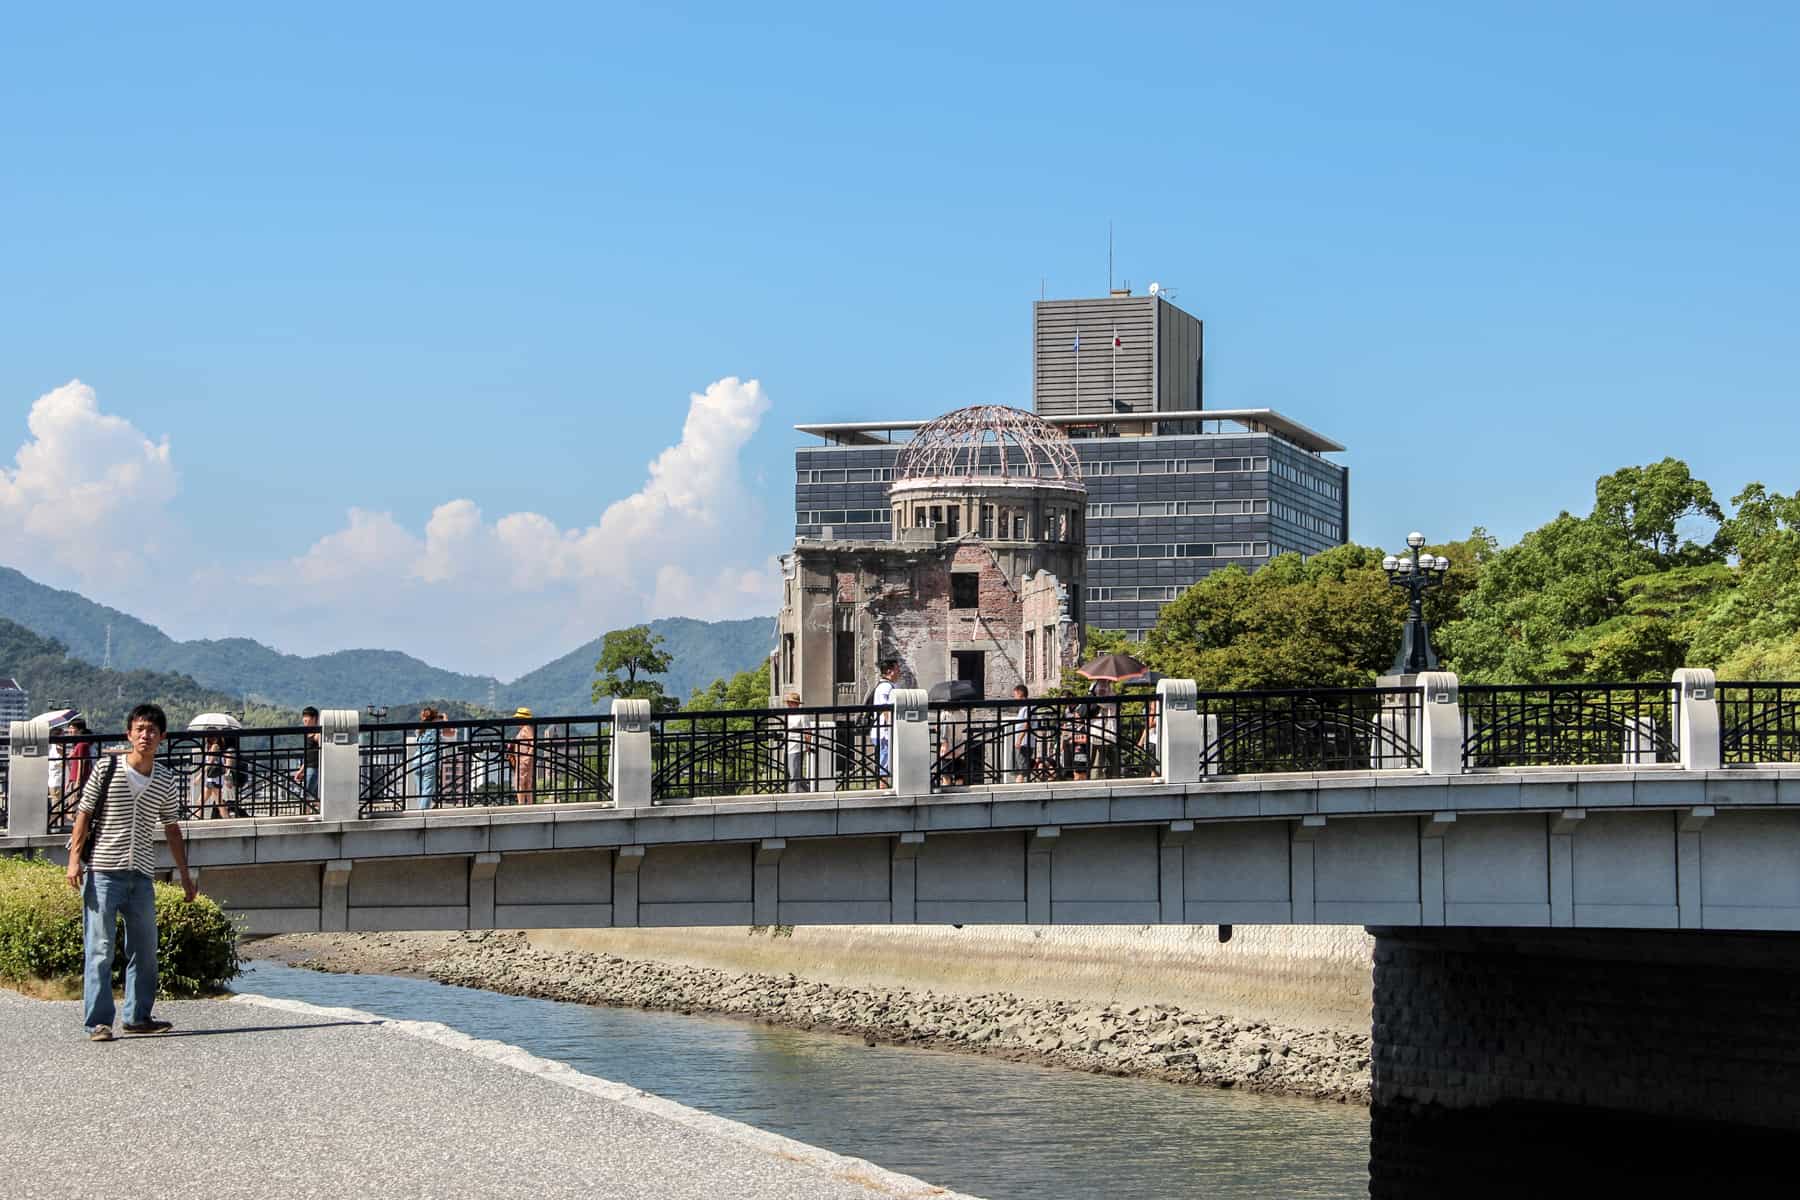 People walking over the river bridge in from of the A-Bomb Dome in Hiroshima's Peace Park Memorial.